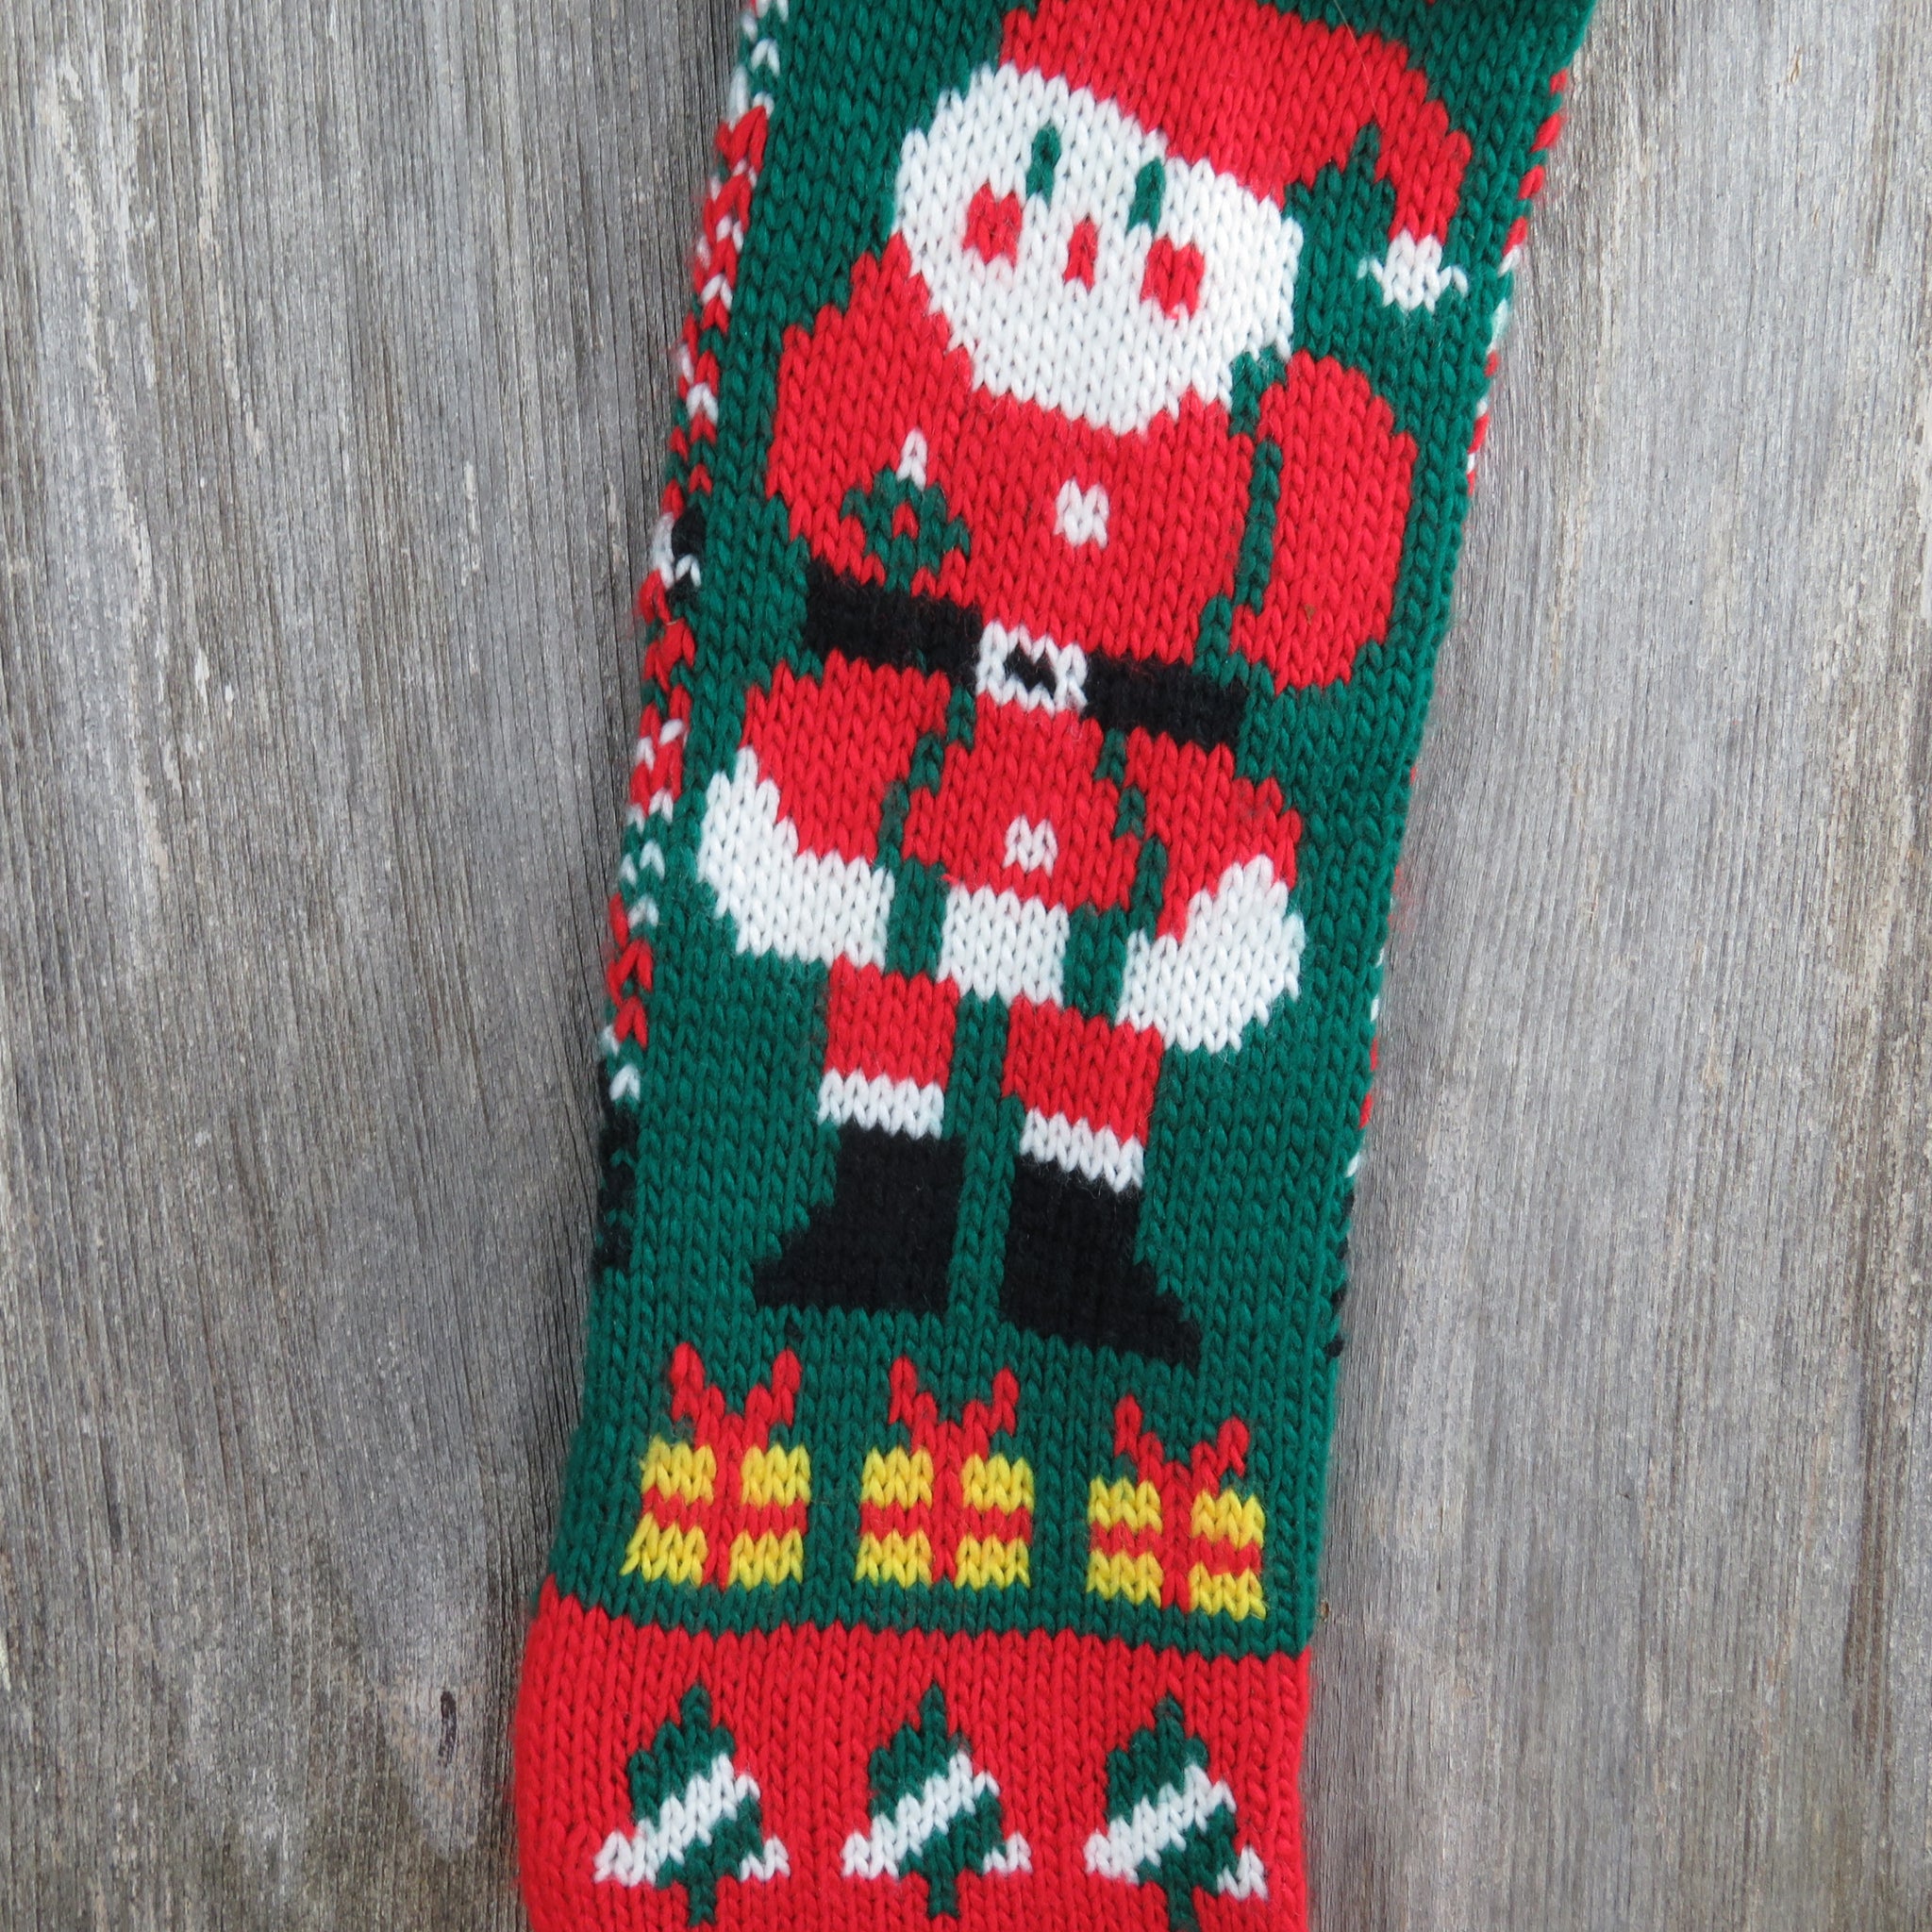 Vintage Santa Claus Stocking Knitted Knit Hearts Green Red White Chris ...